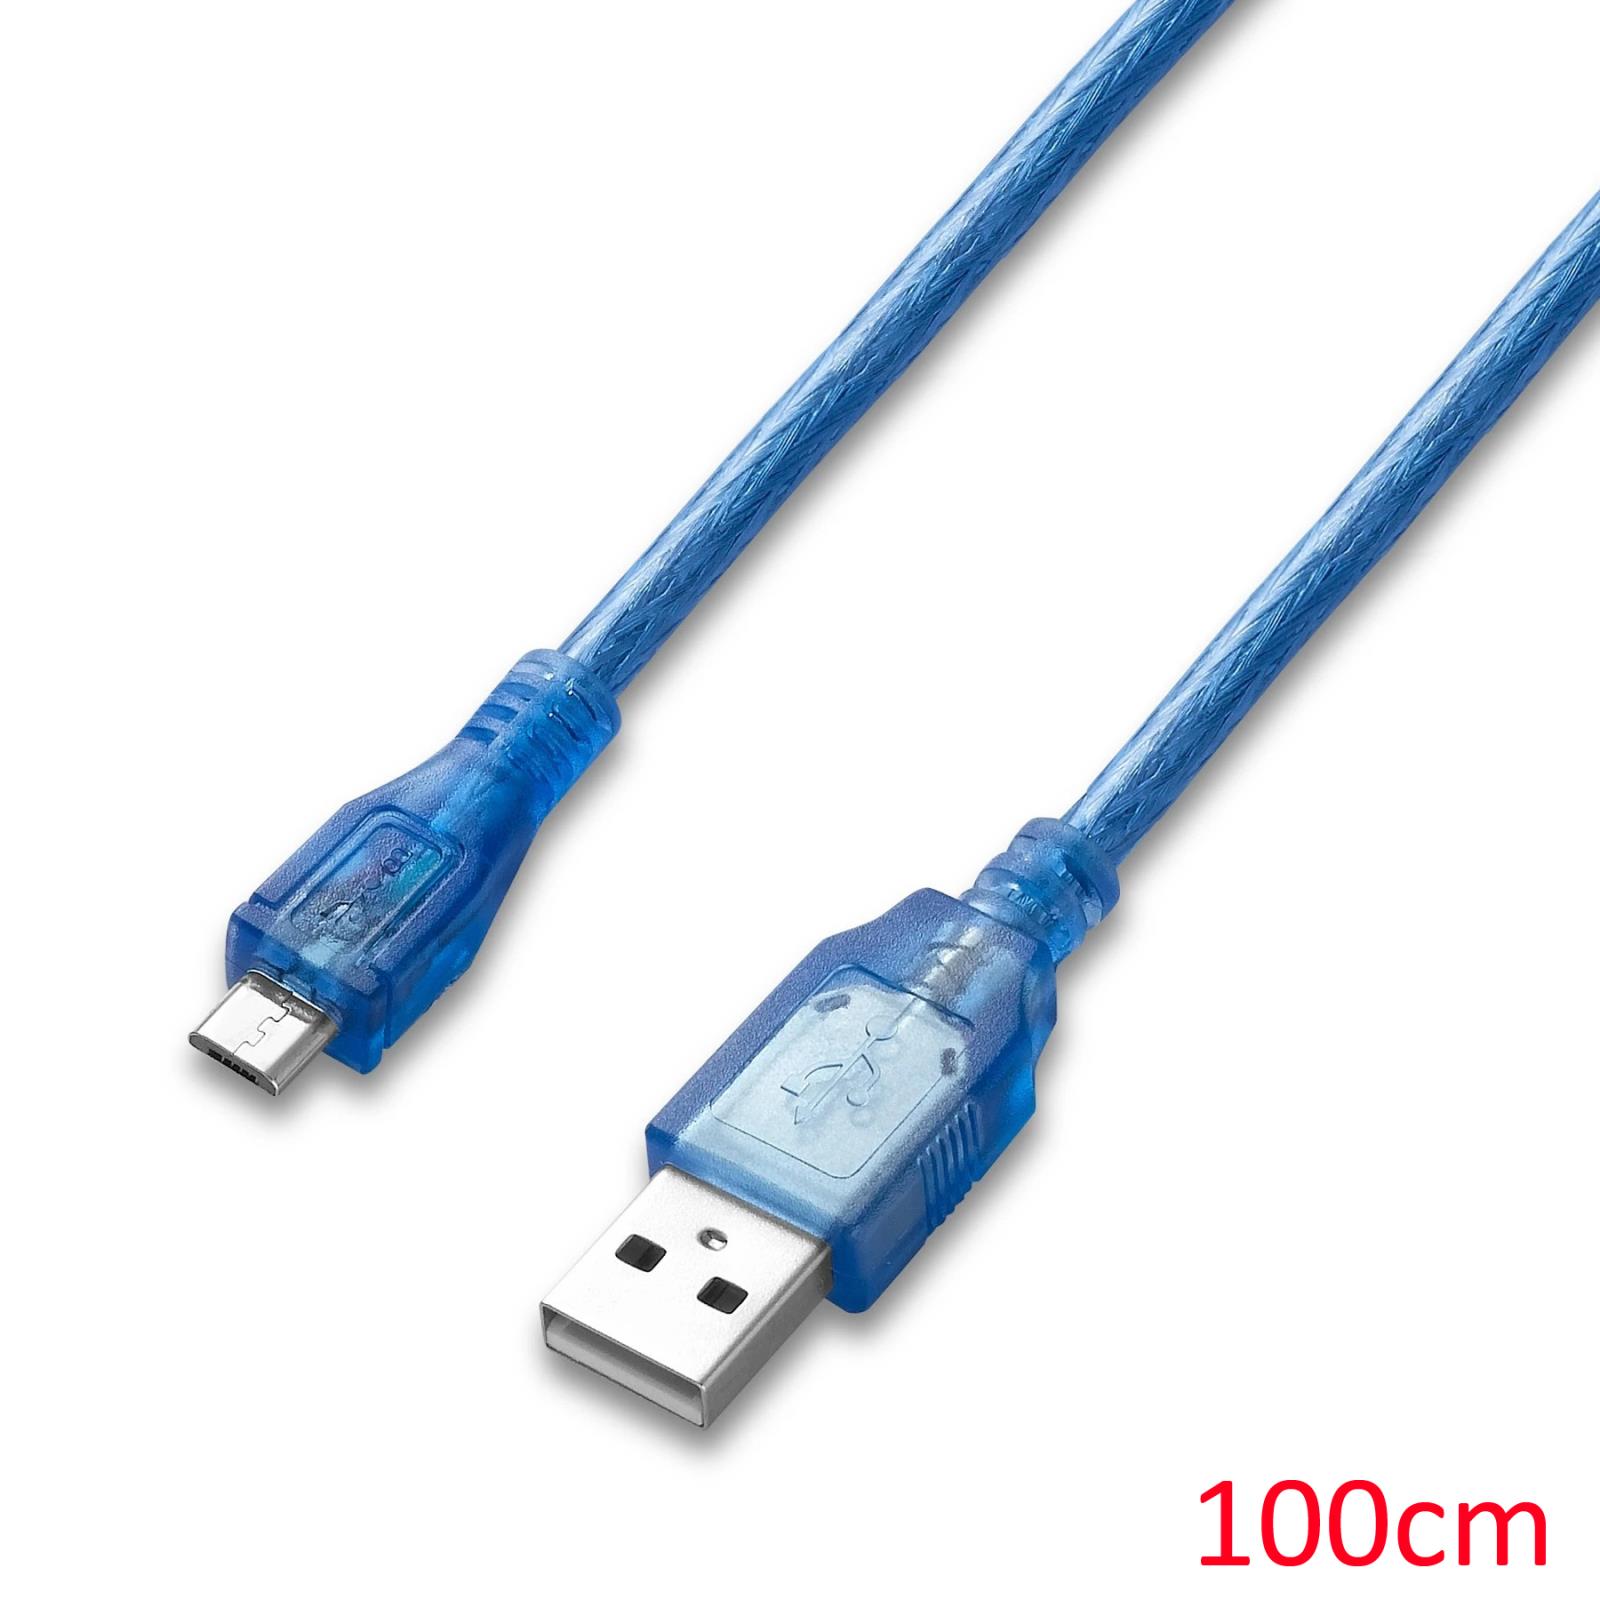 1M 100cm USB Type A to Micro 5P Data Cable